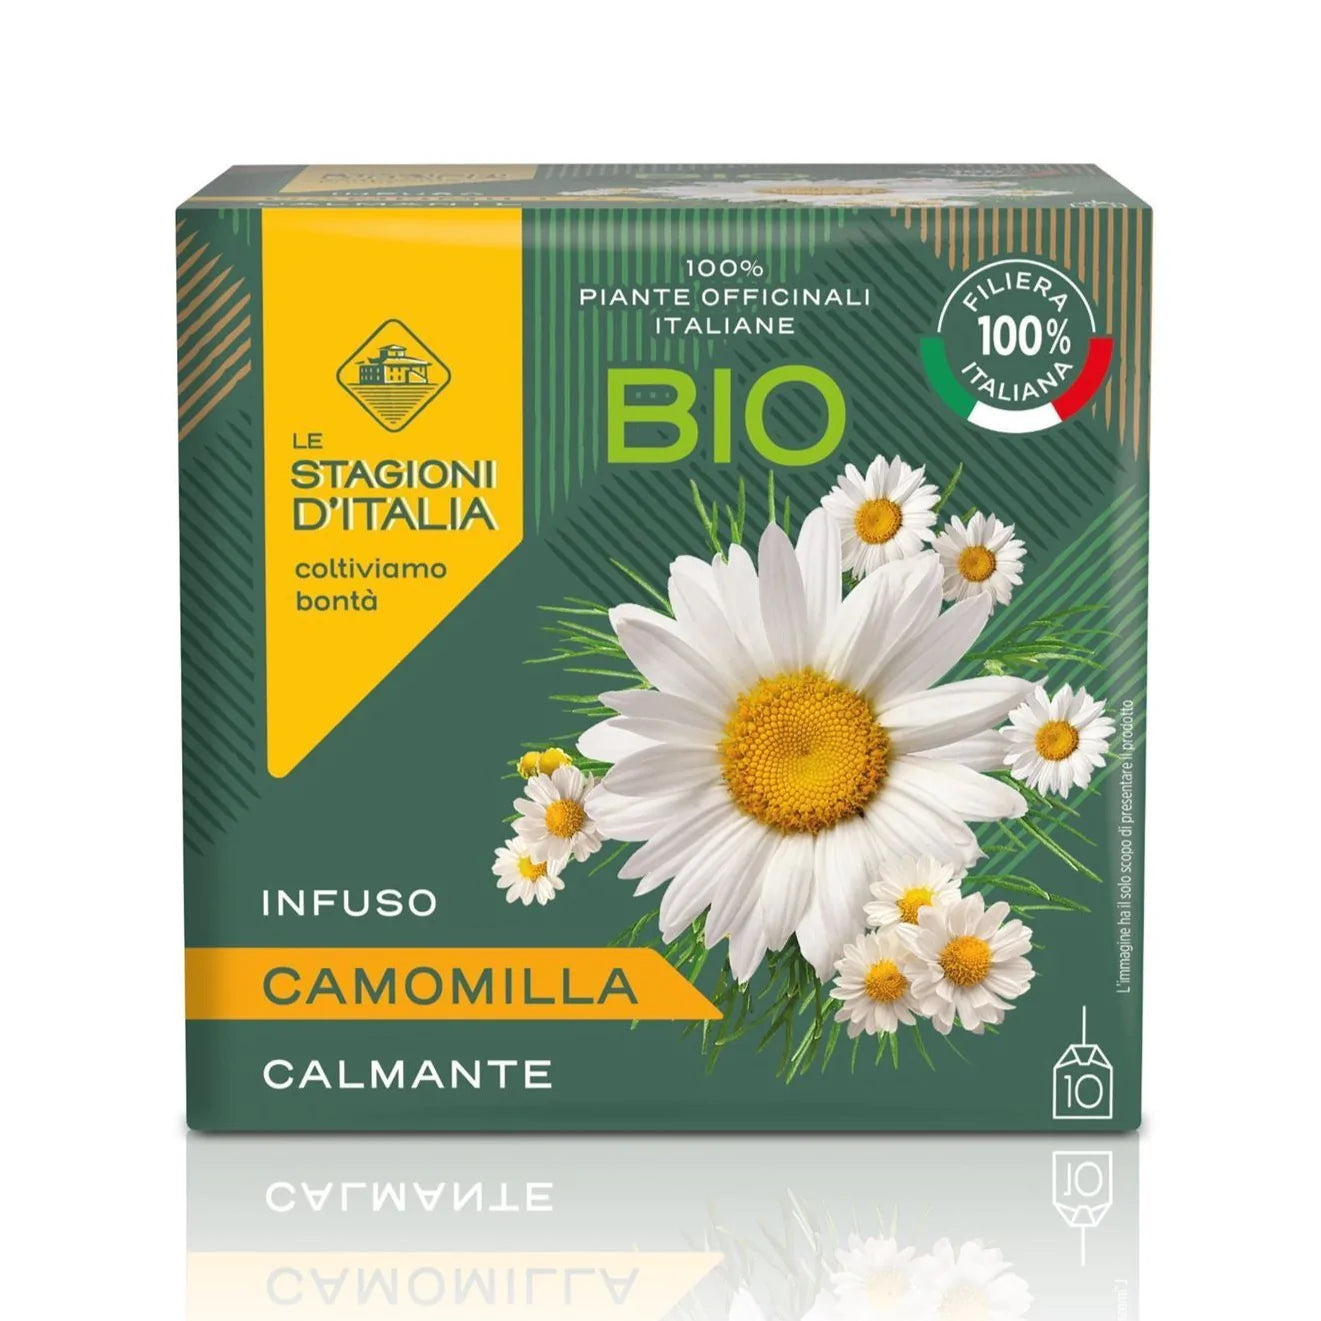 The Seasons of Italy Infusion Calmante Camomille Bio 15 Gr